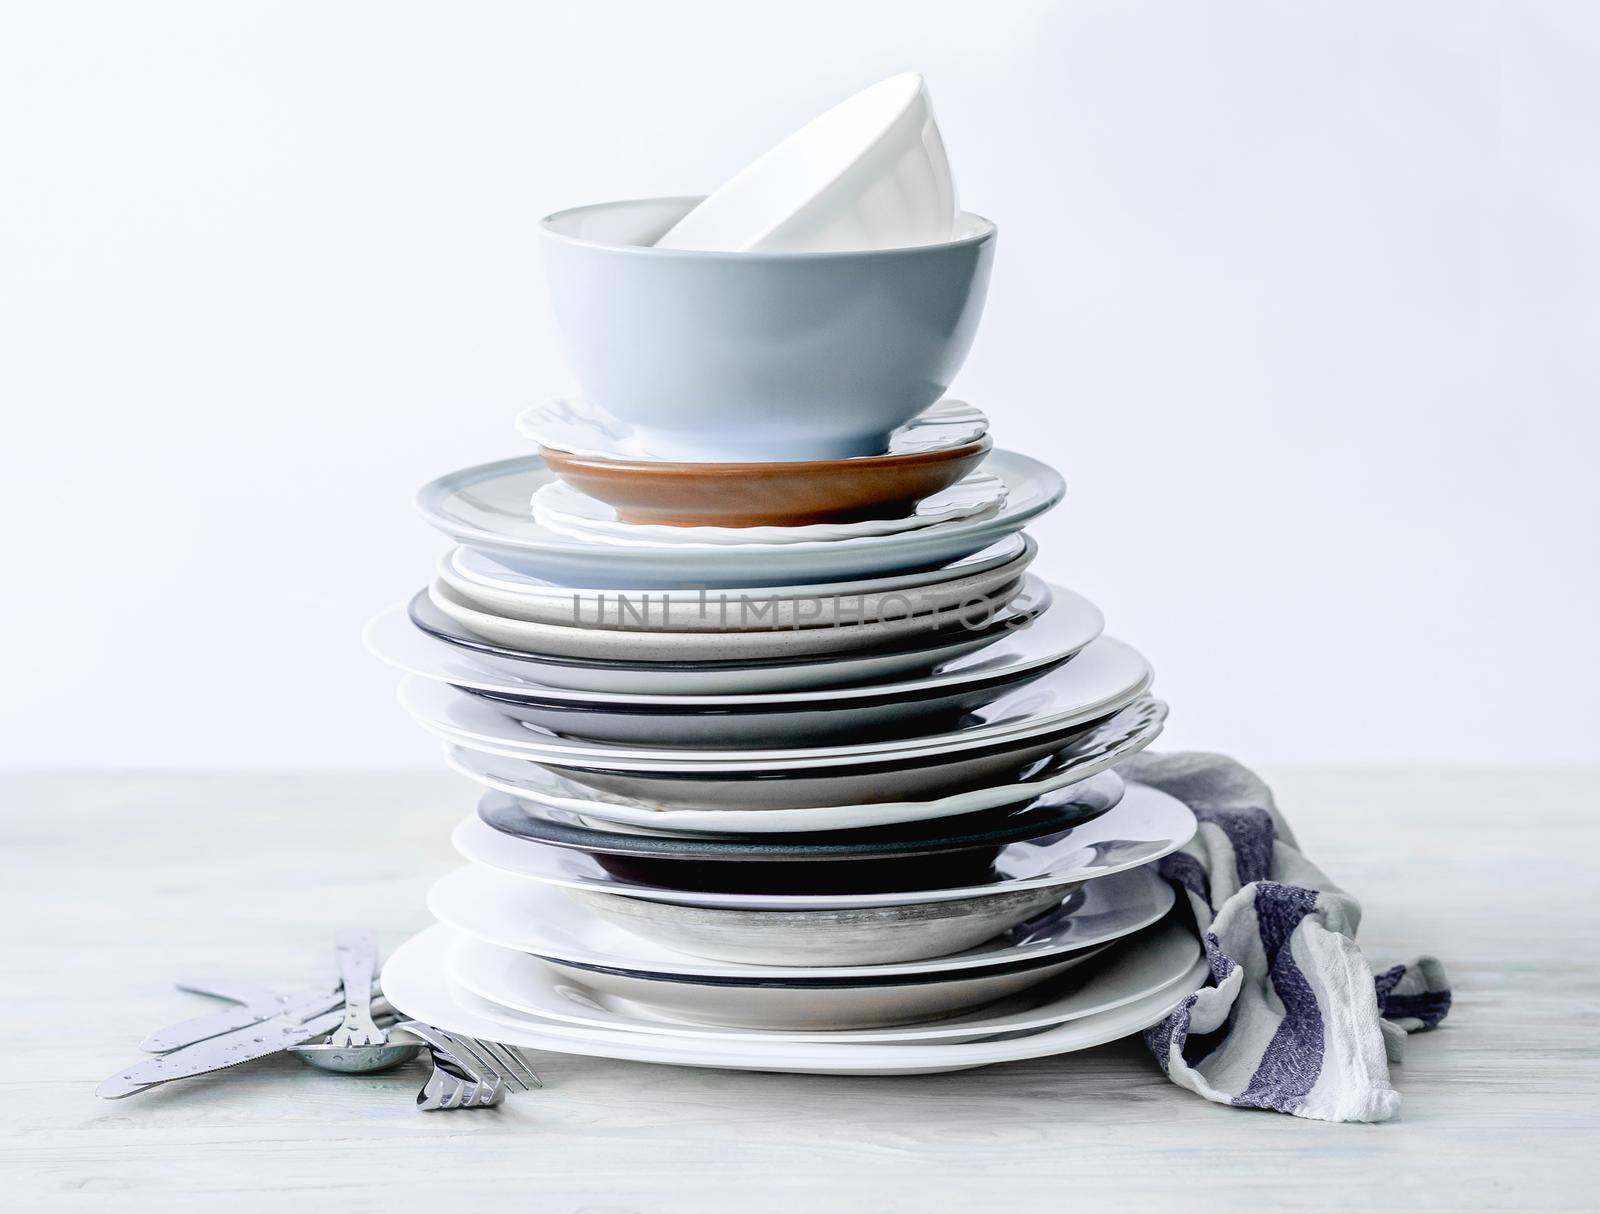 Stack of different porcelain plates on white table